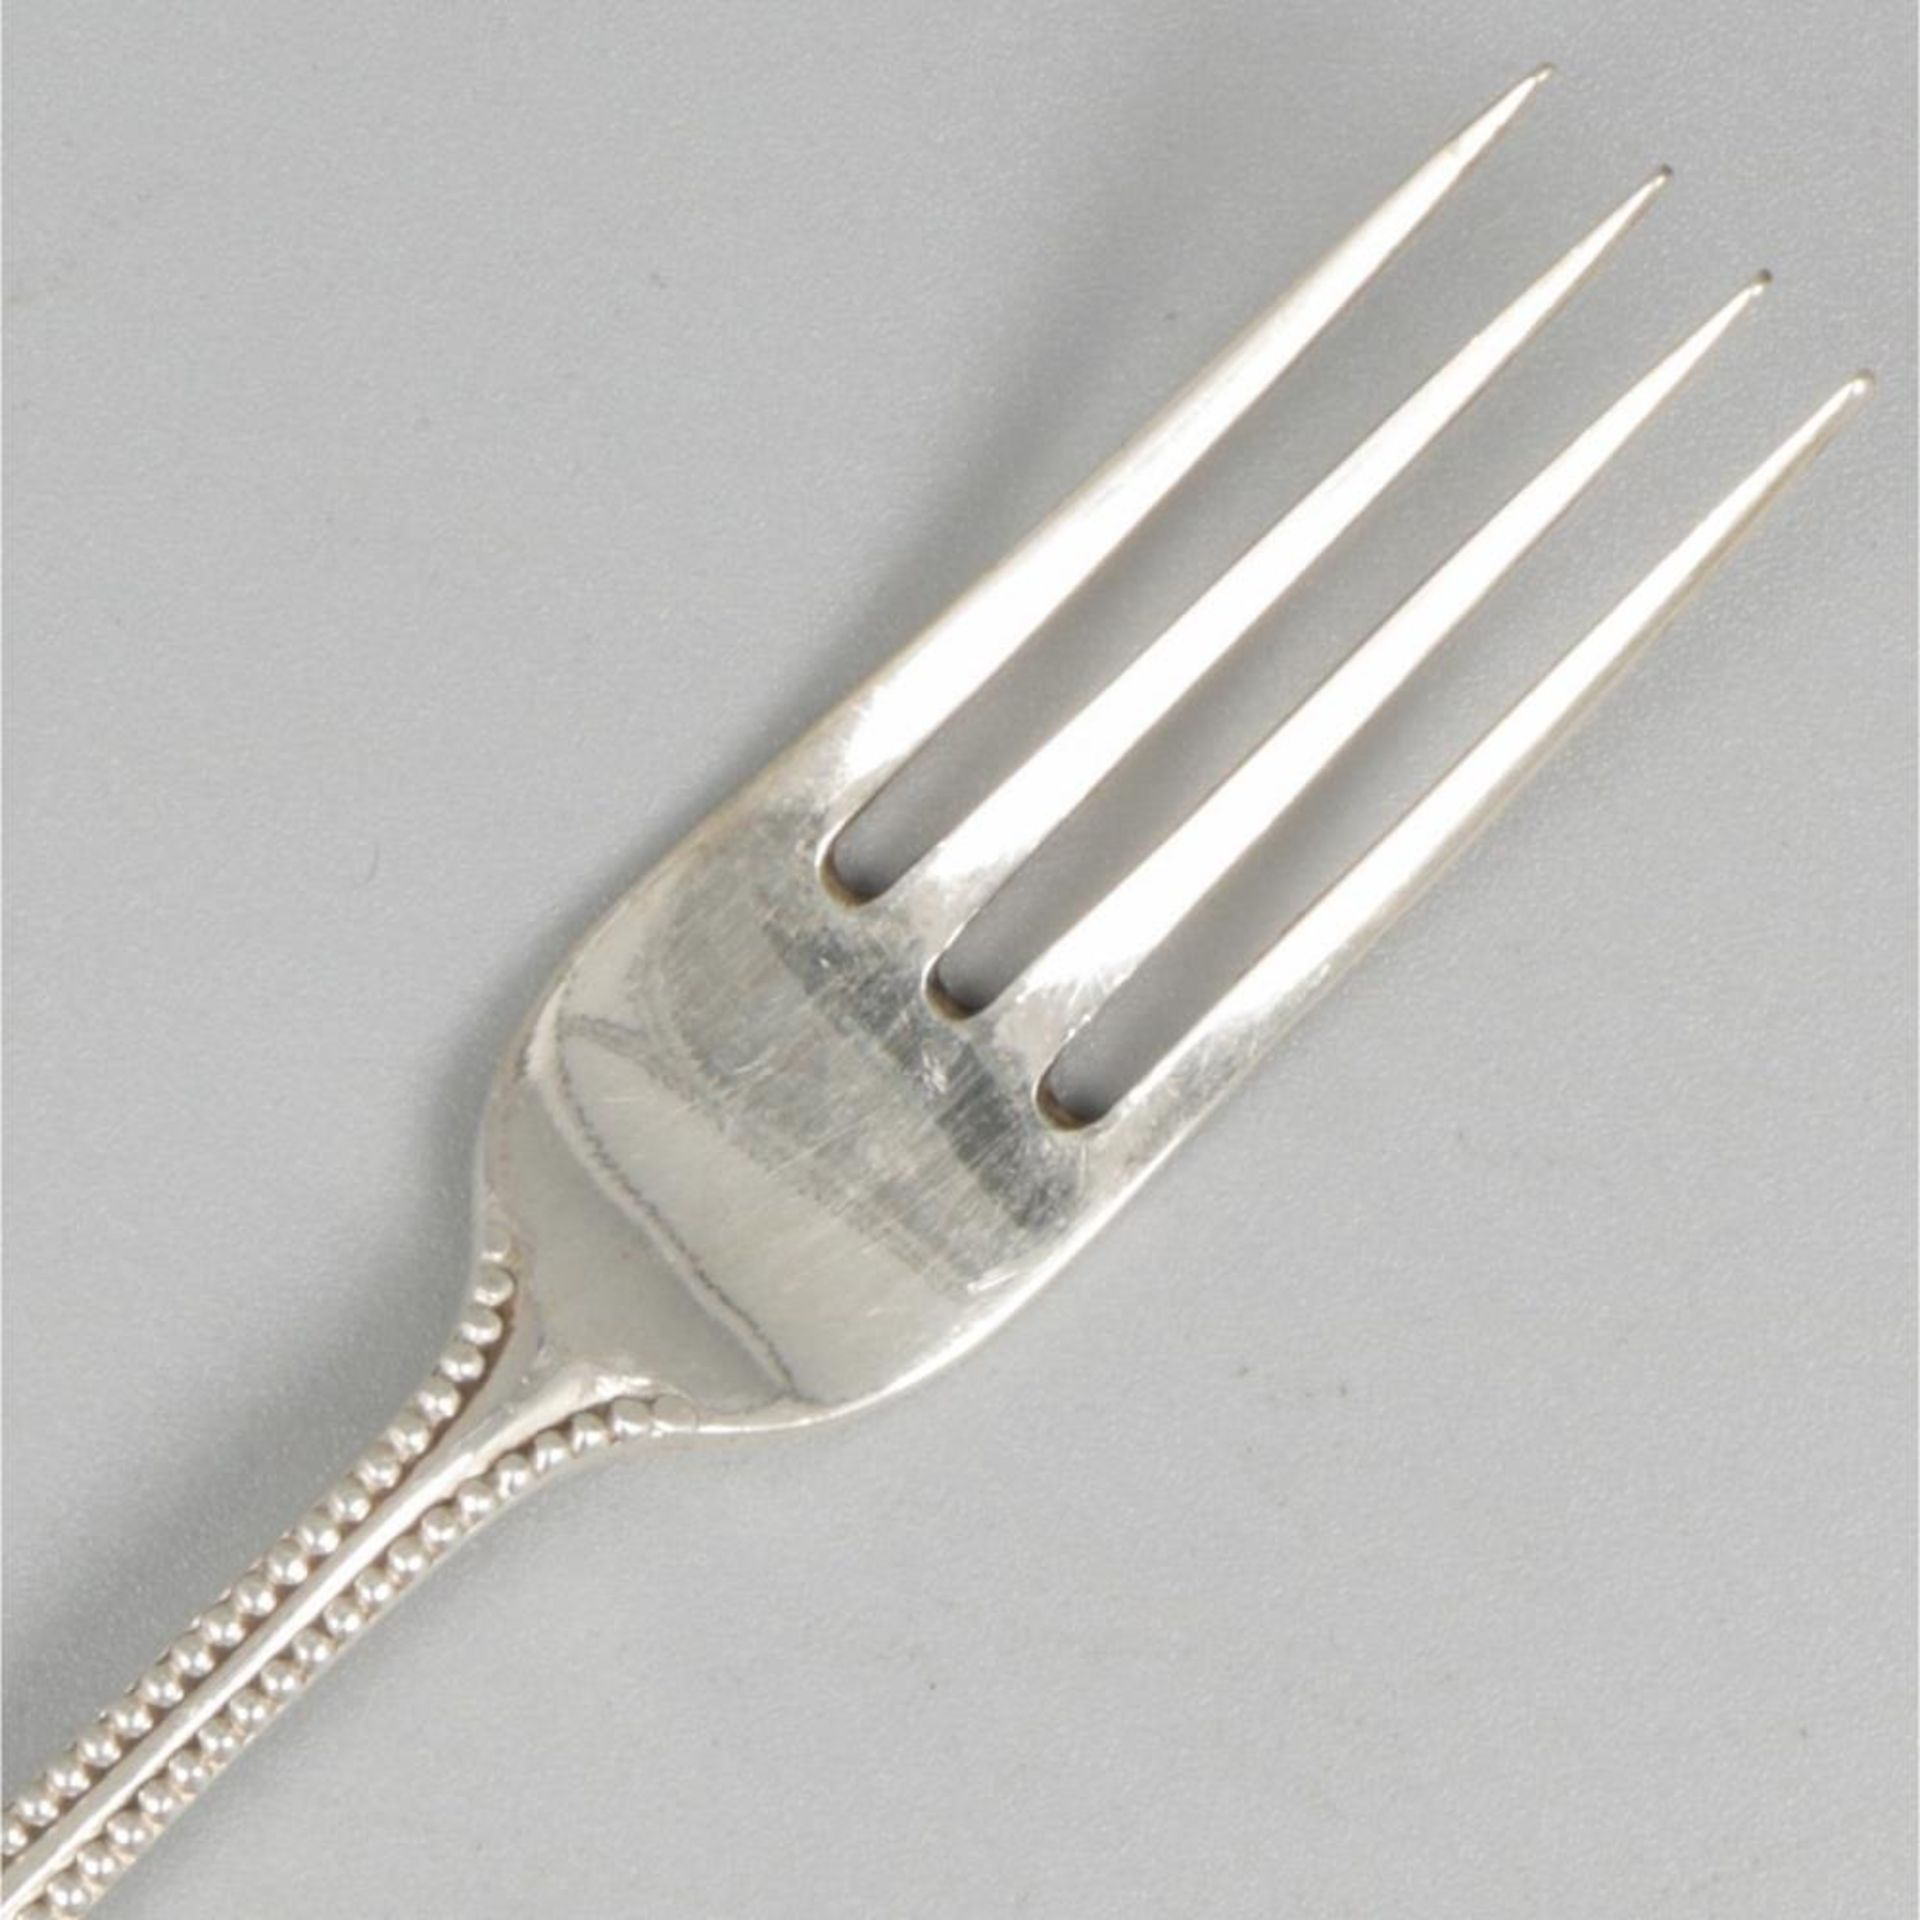 12-piece set of silver fish cutlery. - Image 5 of 10